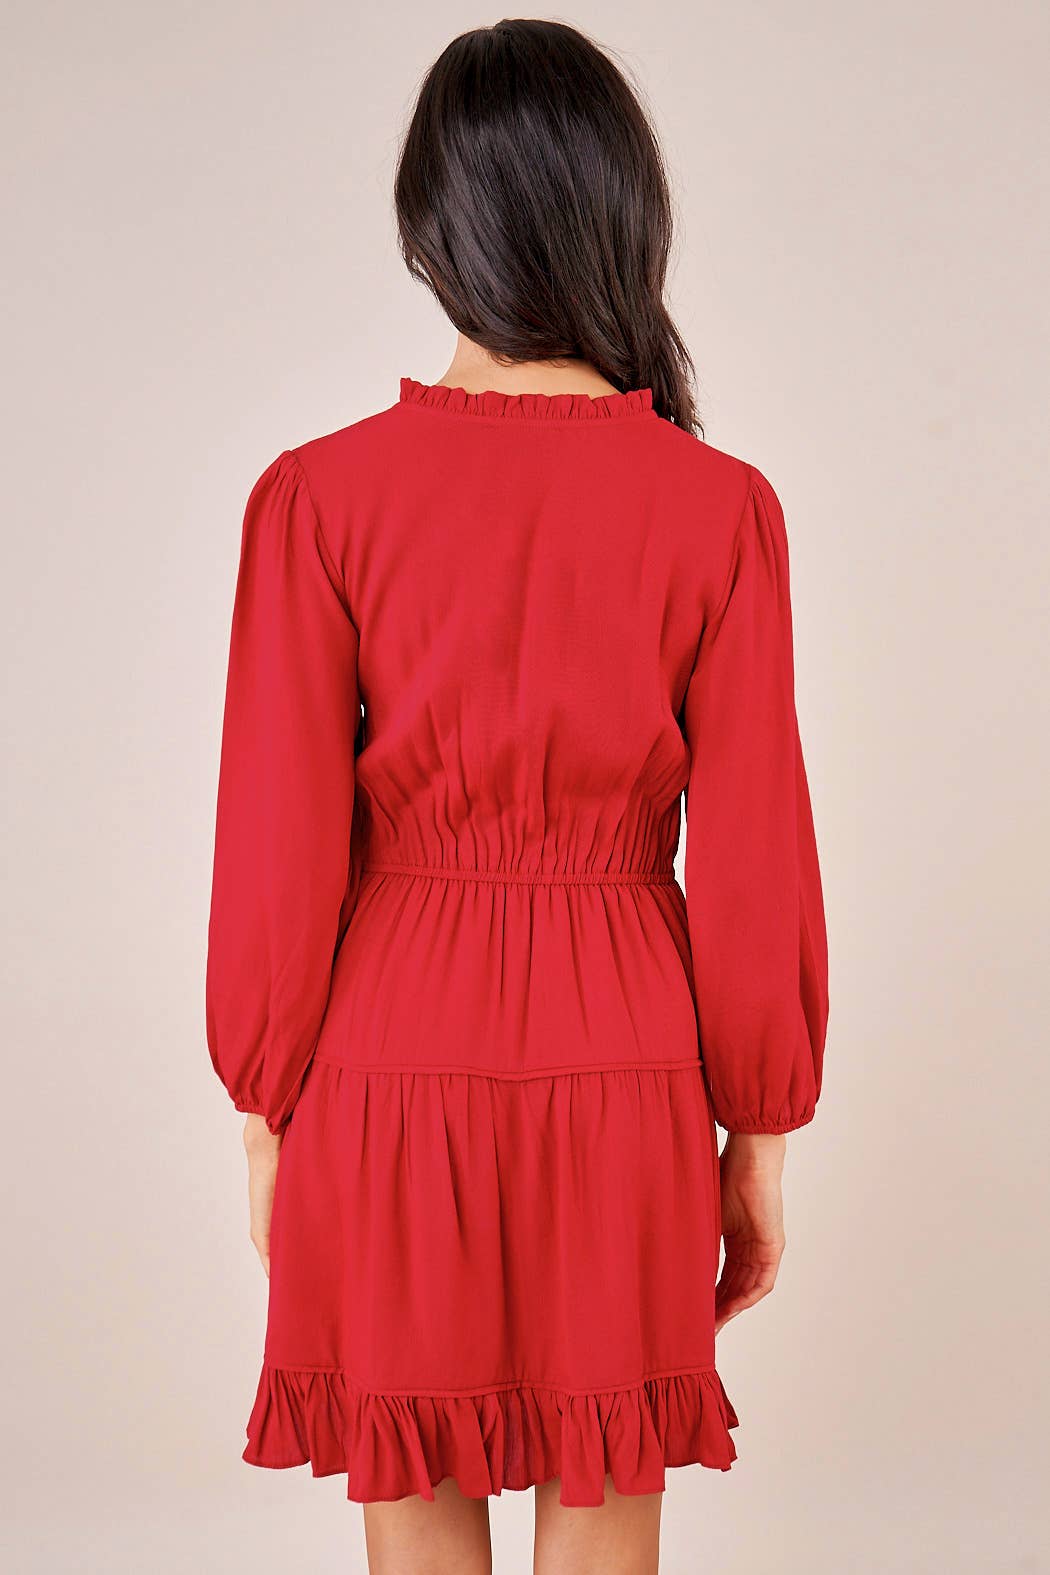 Lilly Long Sleeve Red Dress - Salud HTX